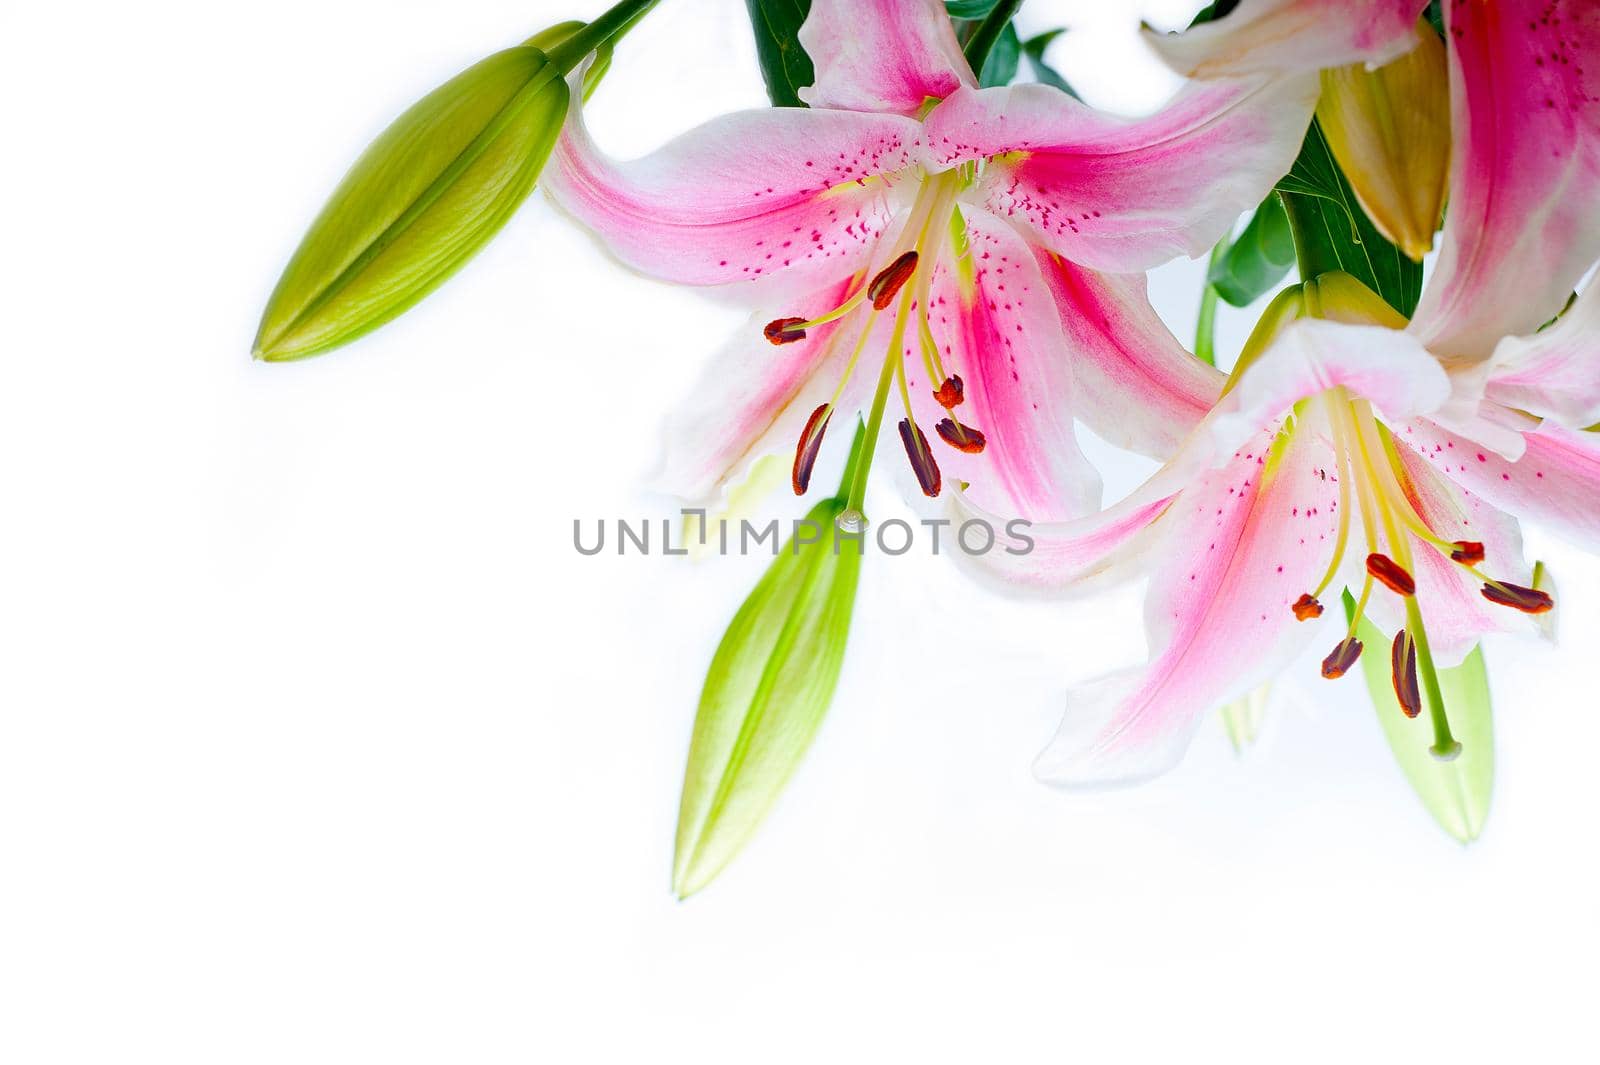 lily flowers corner frame over white background copyspace